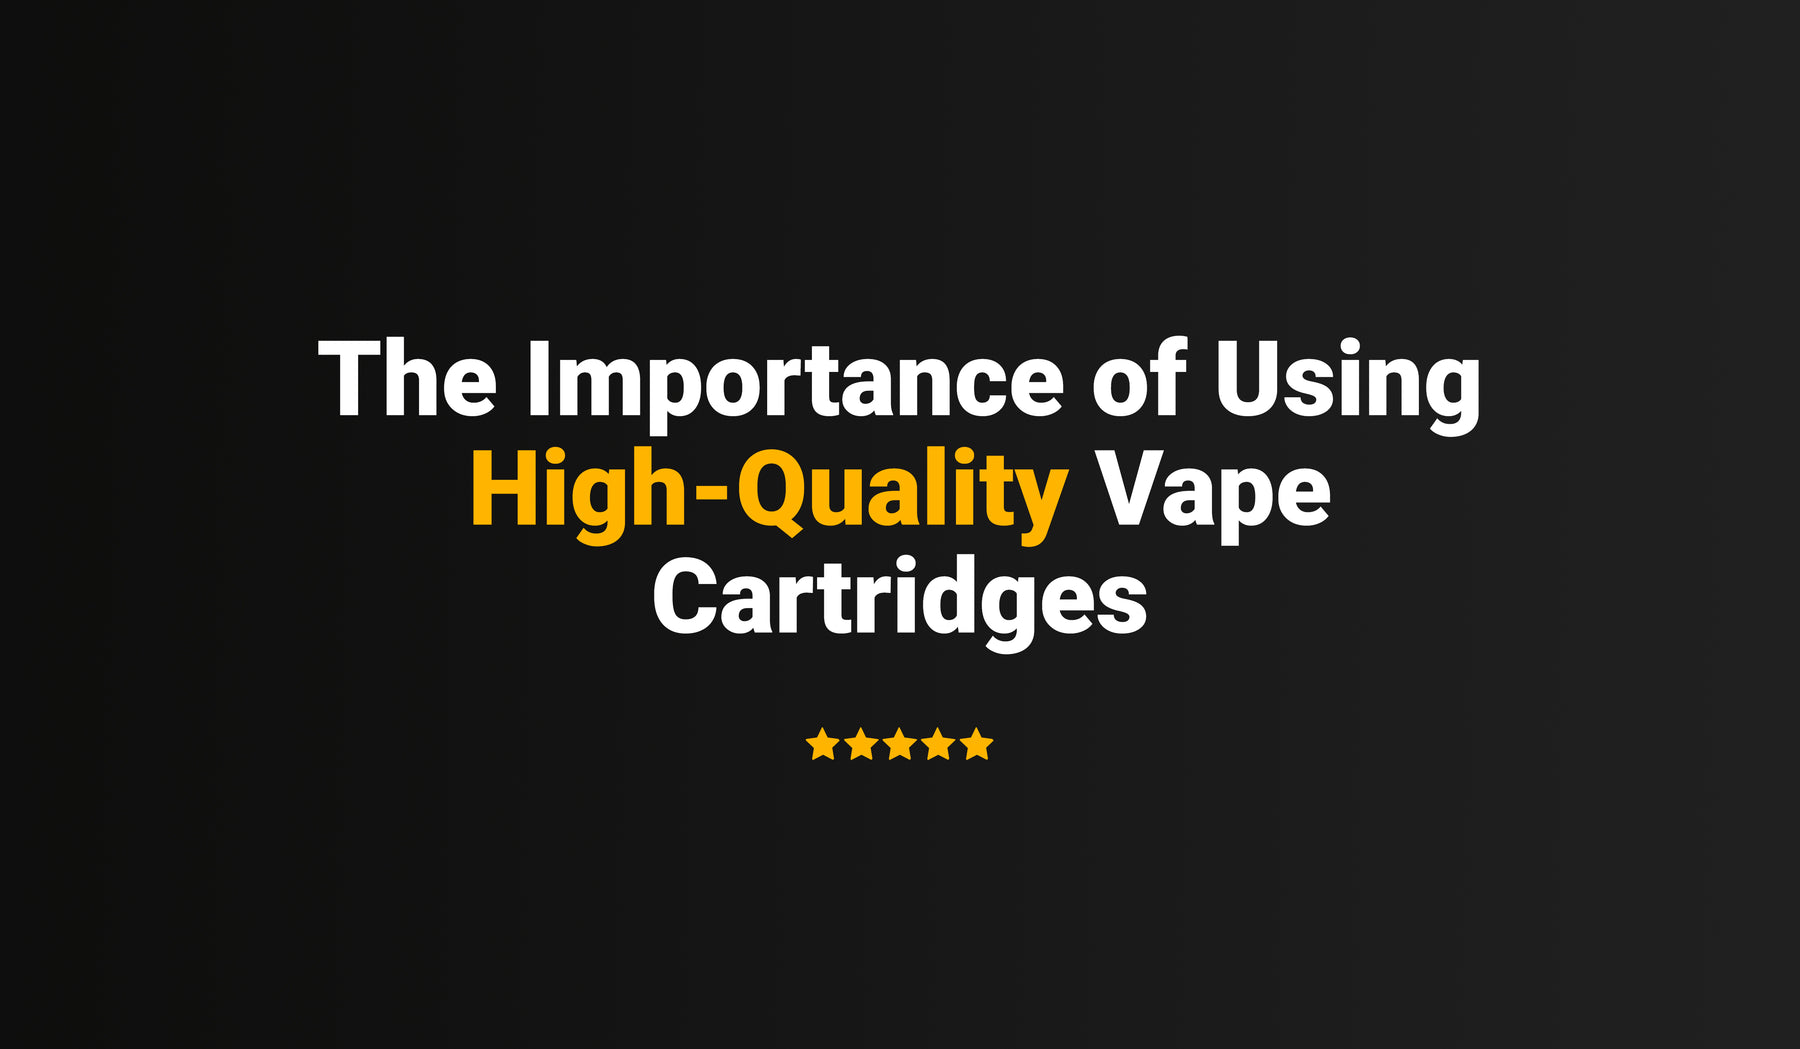 The Importance of Using High-Quality Vape Cartridges